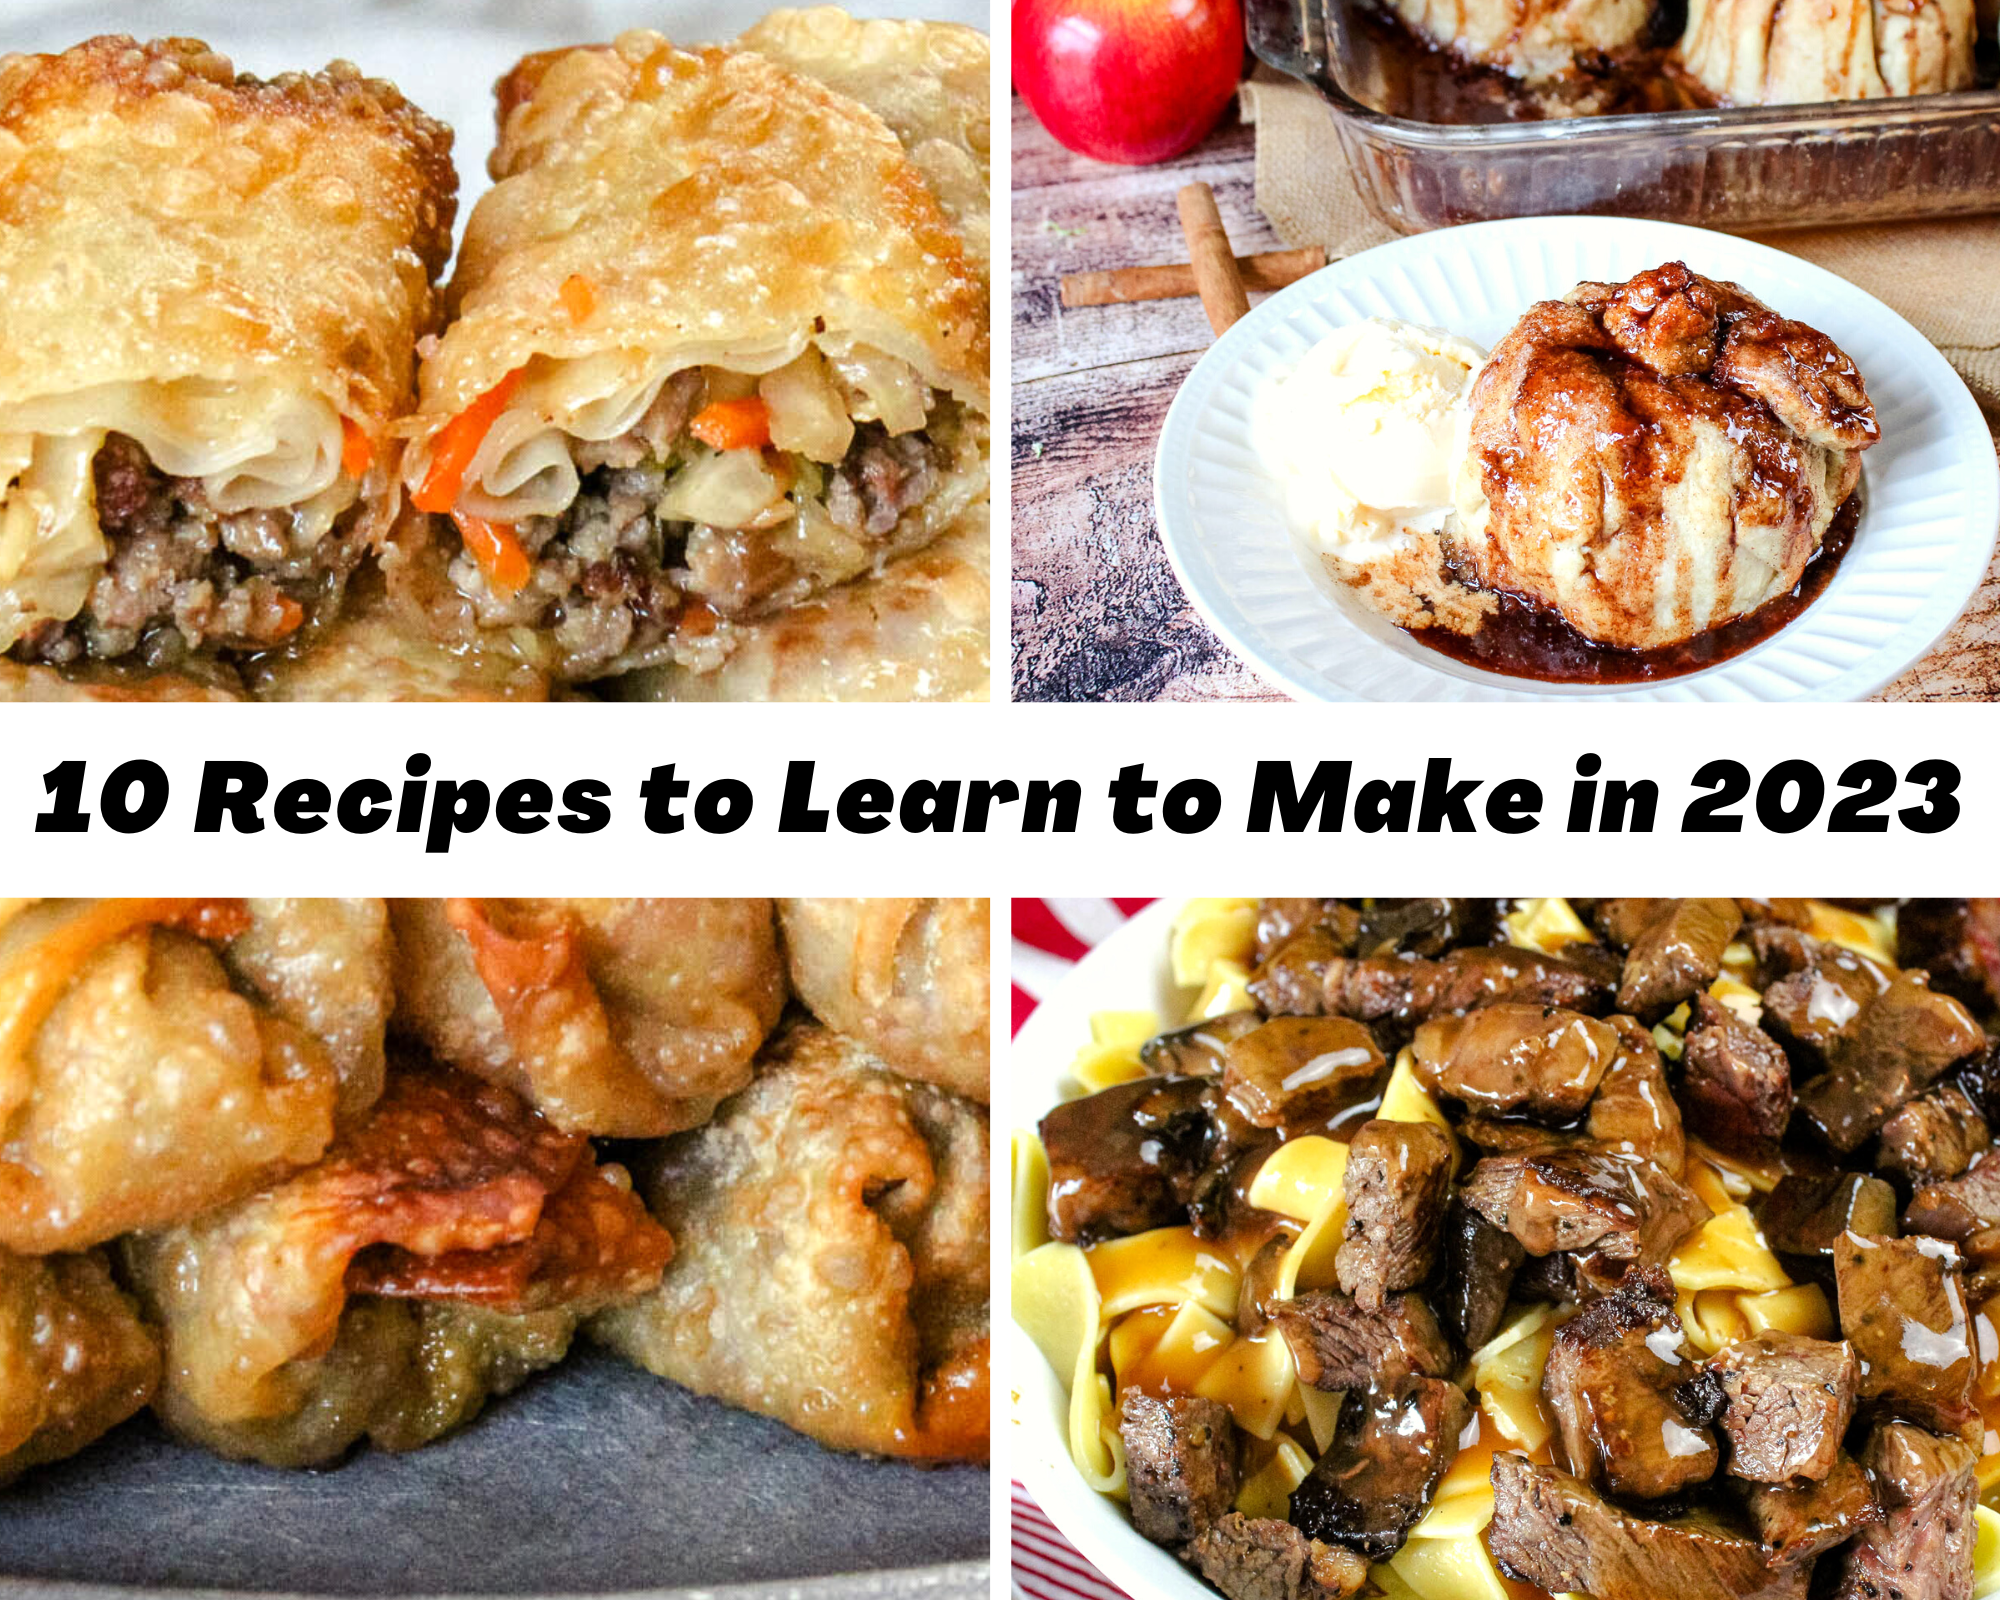 10 Recipes to Learn to Make in 2023